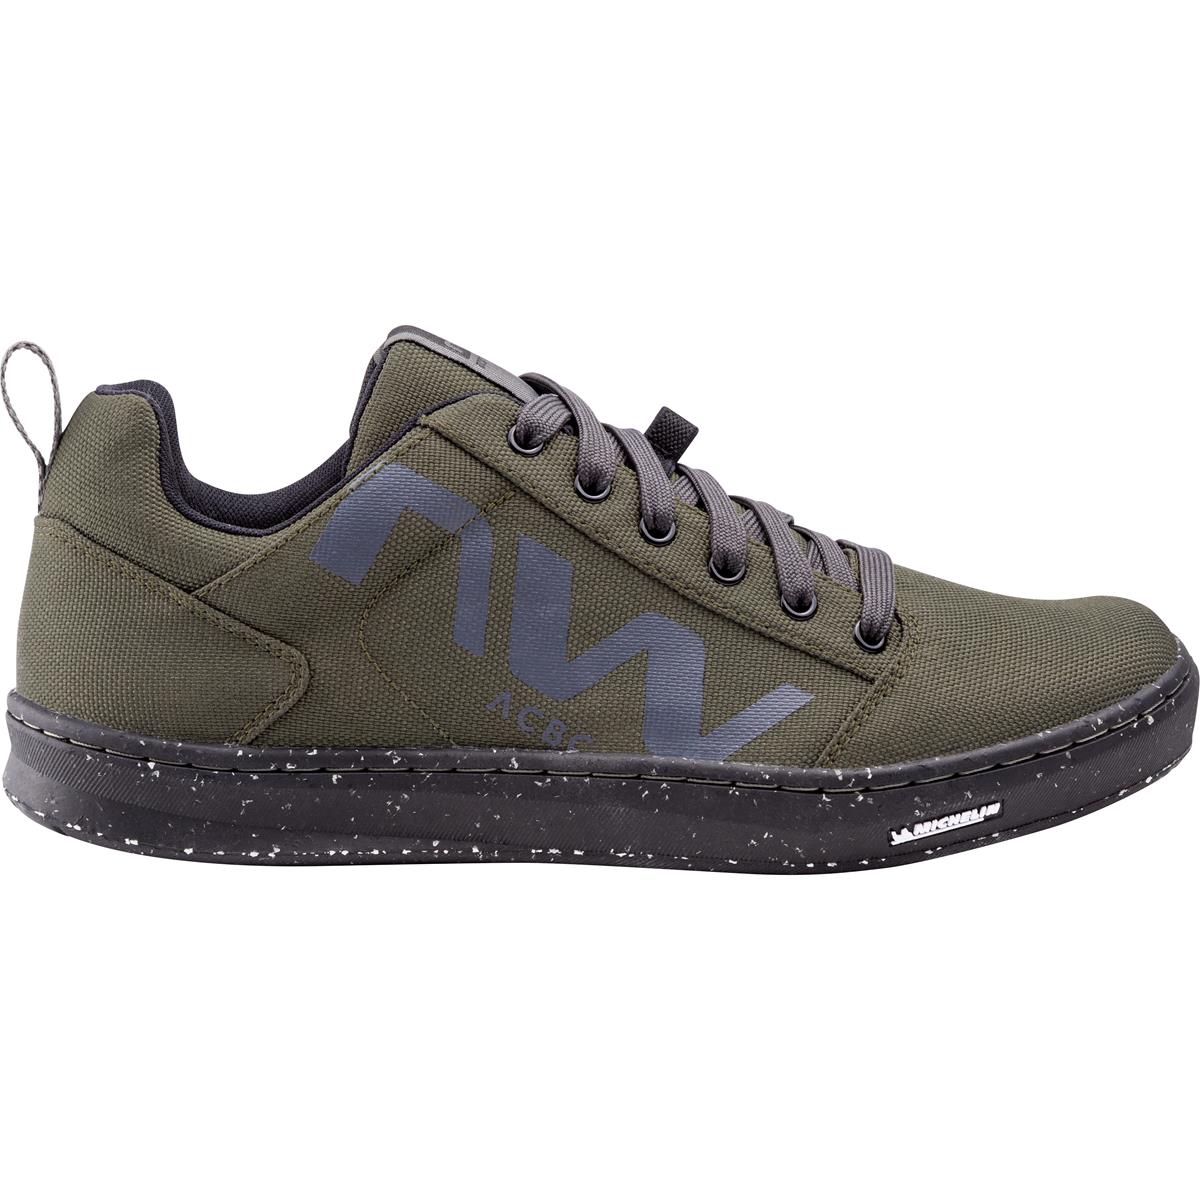 Northwave MTB Shoes Tailwhip Eco Evo Forest Green